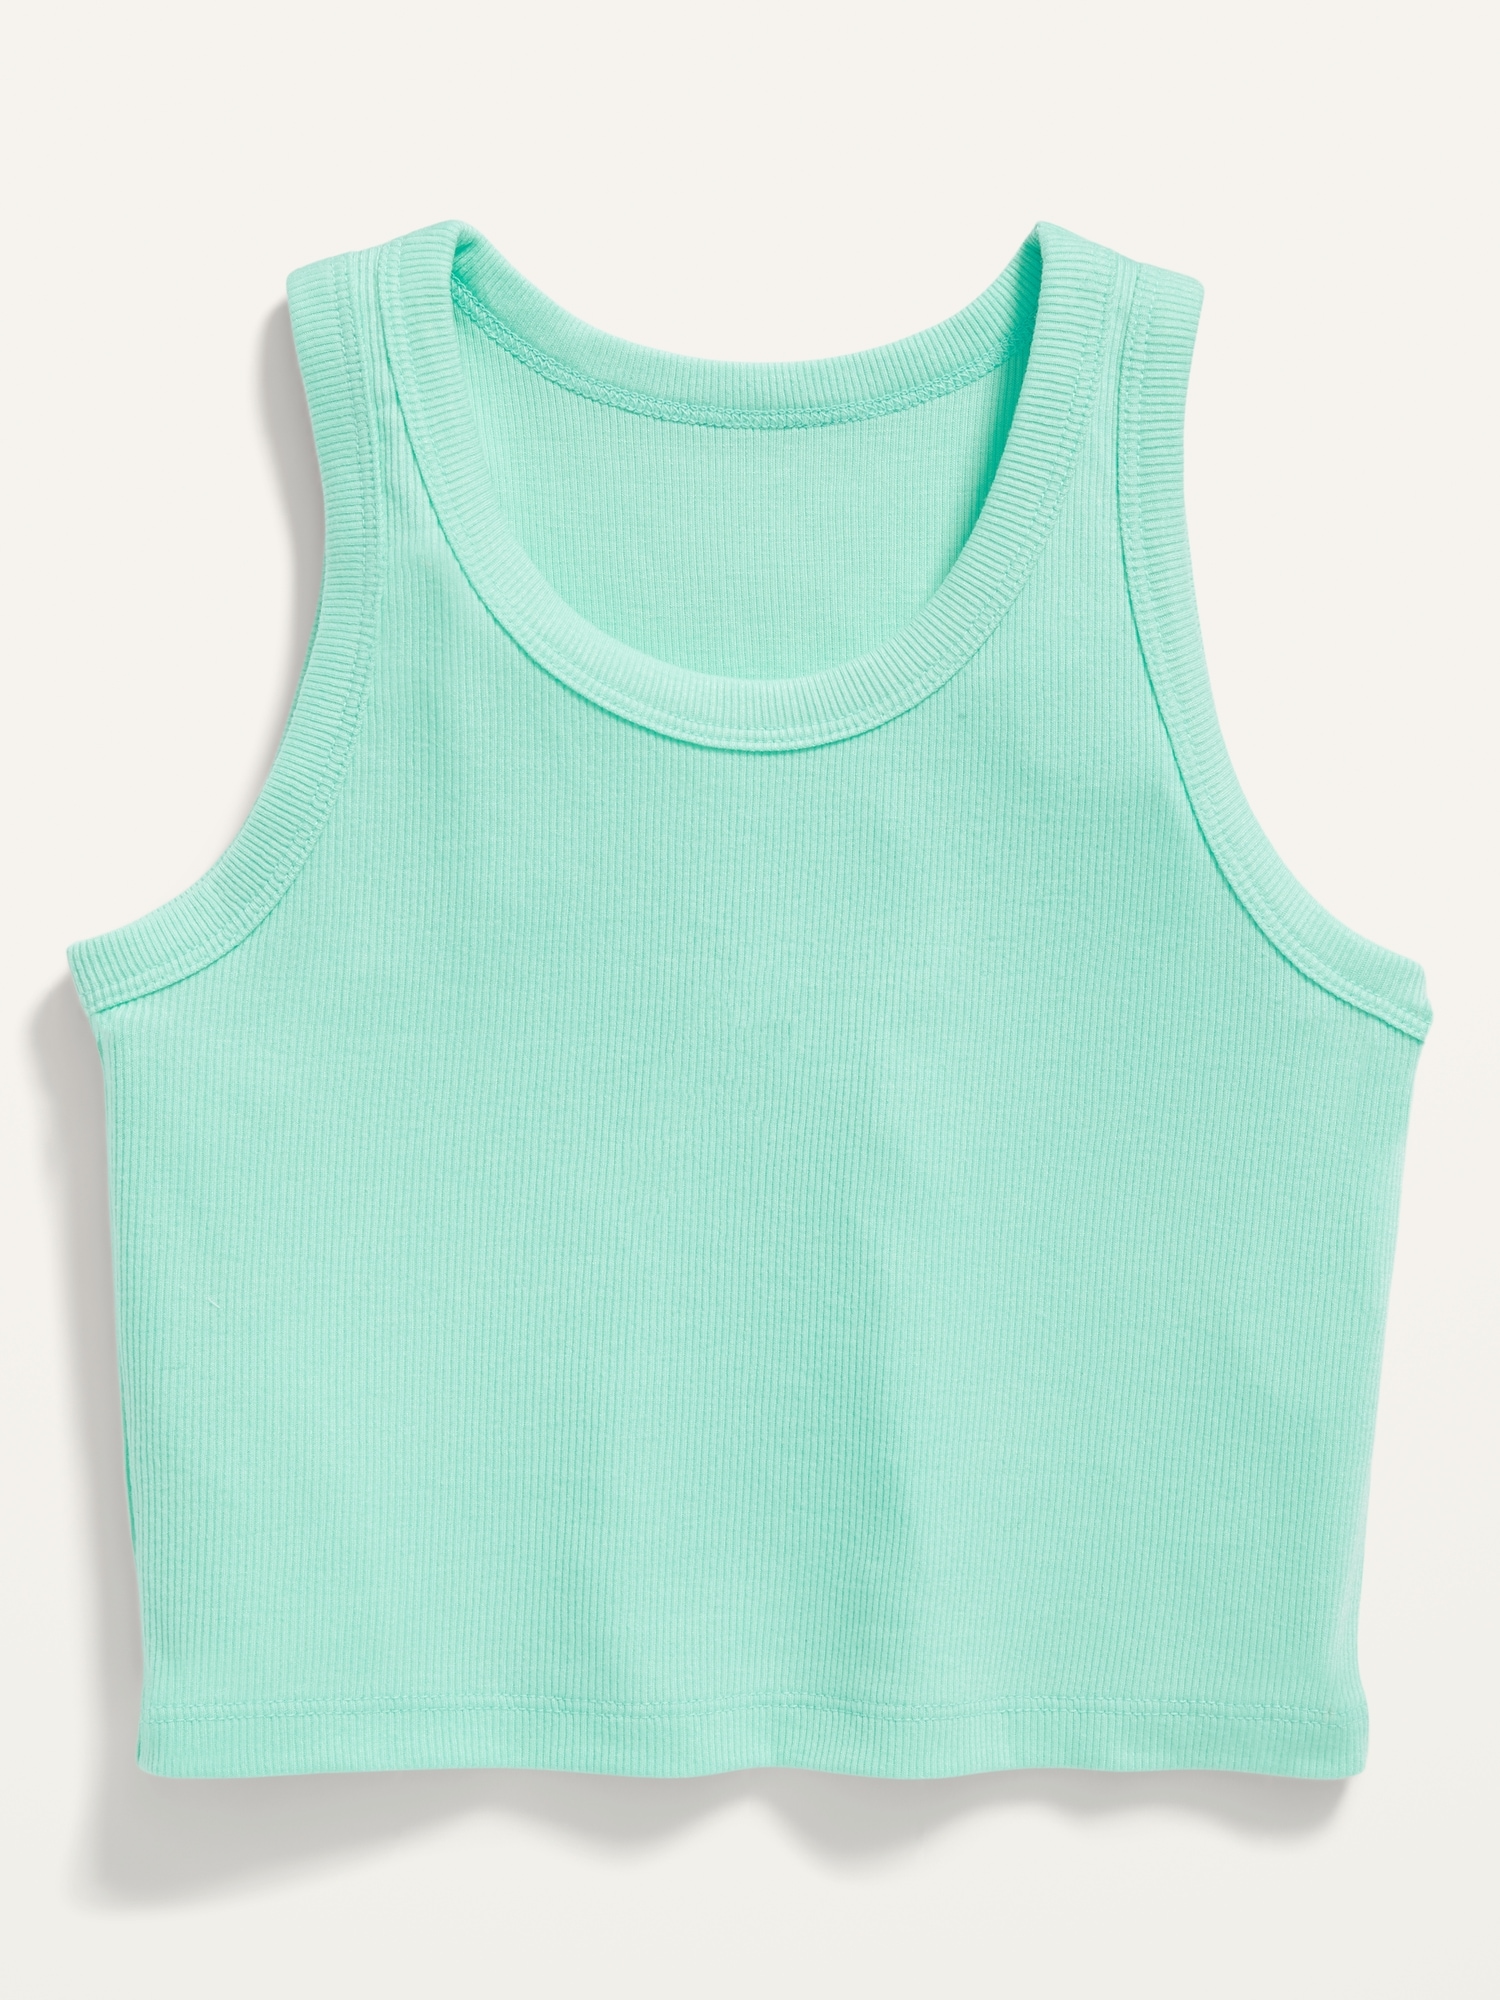 Old Navy Cropped UltraLite Rib-Knit Performance Tank for Girls green. 1